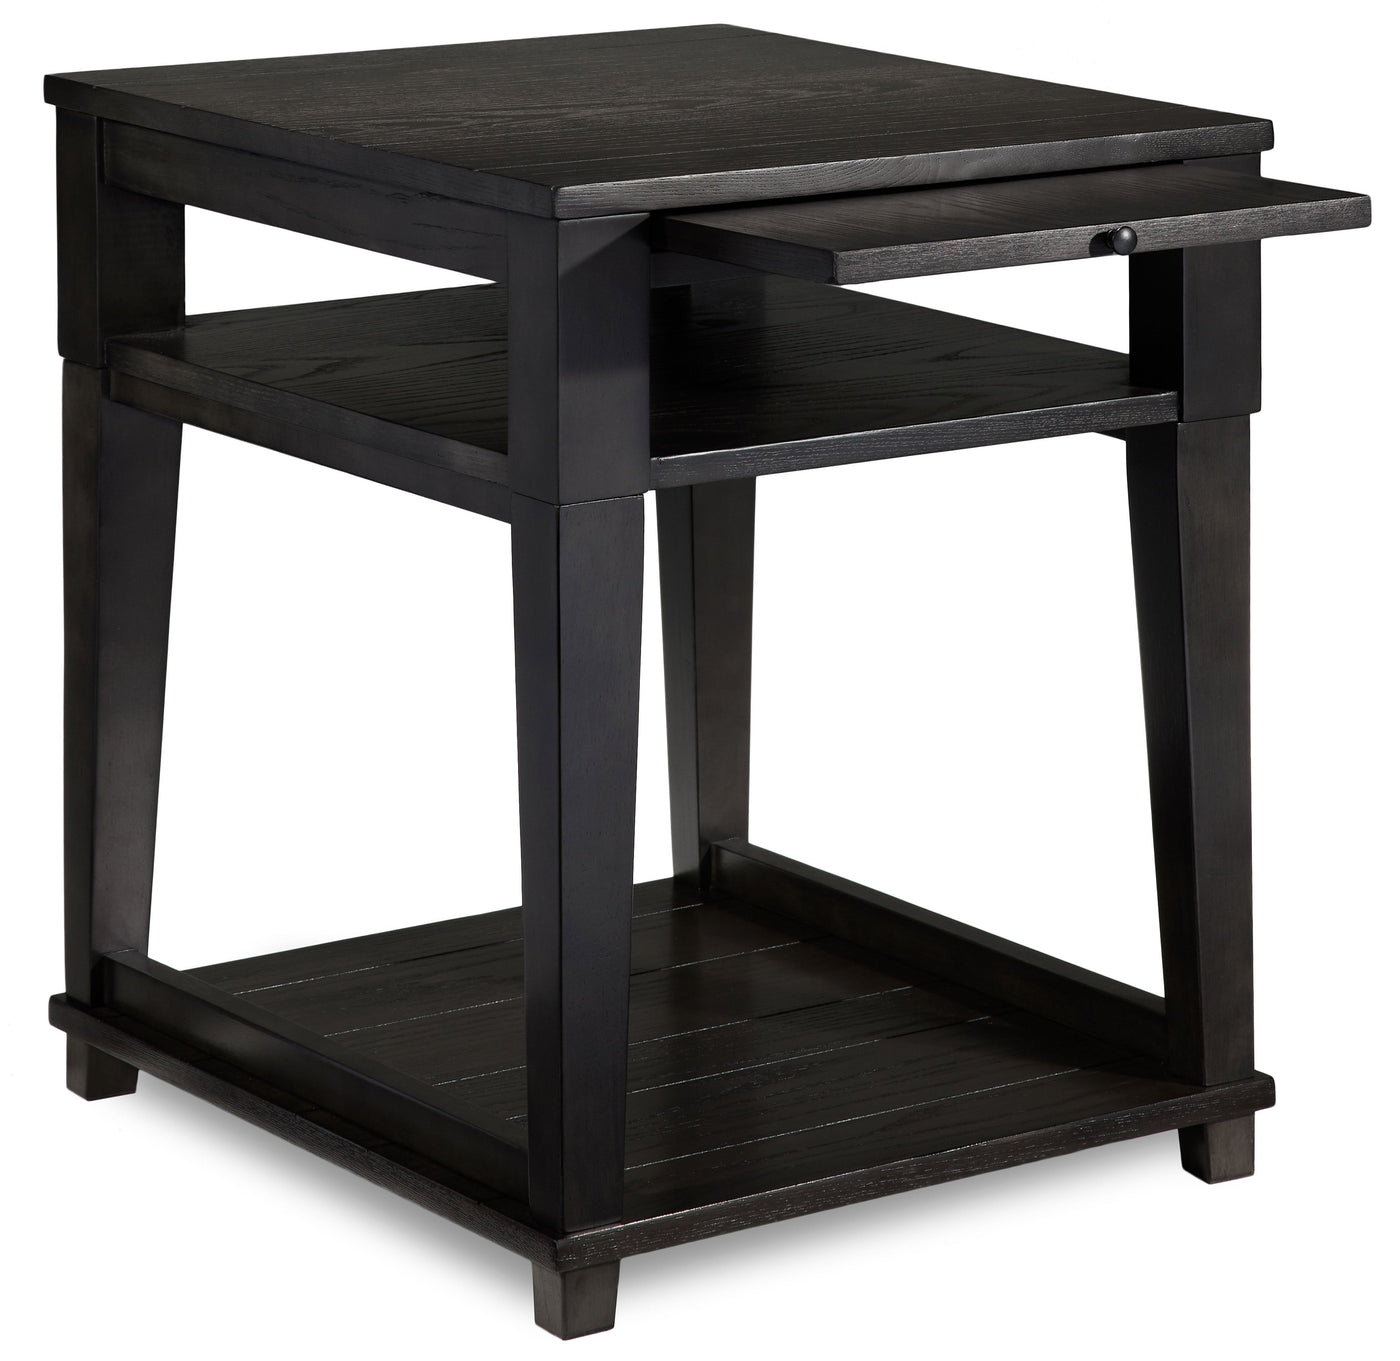 Brandon Chairside Table - African Grey